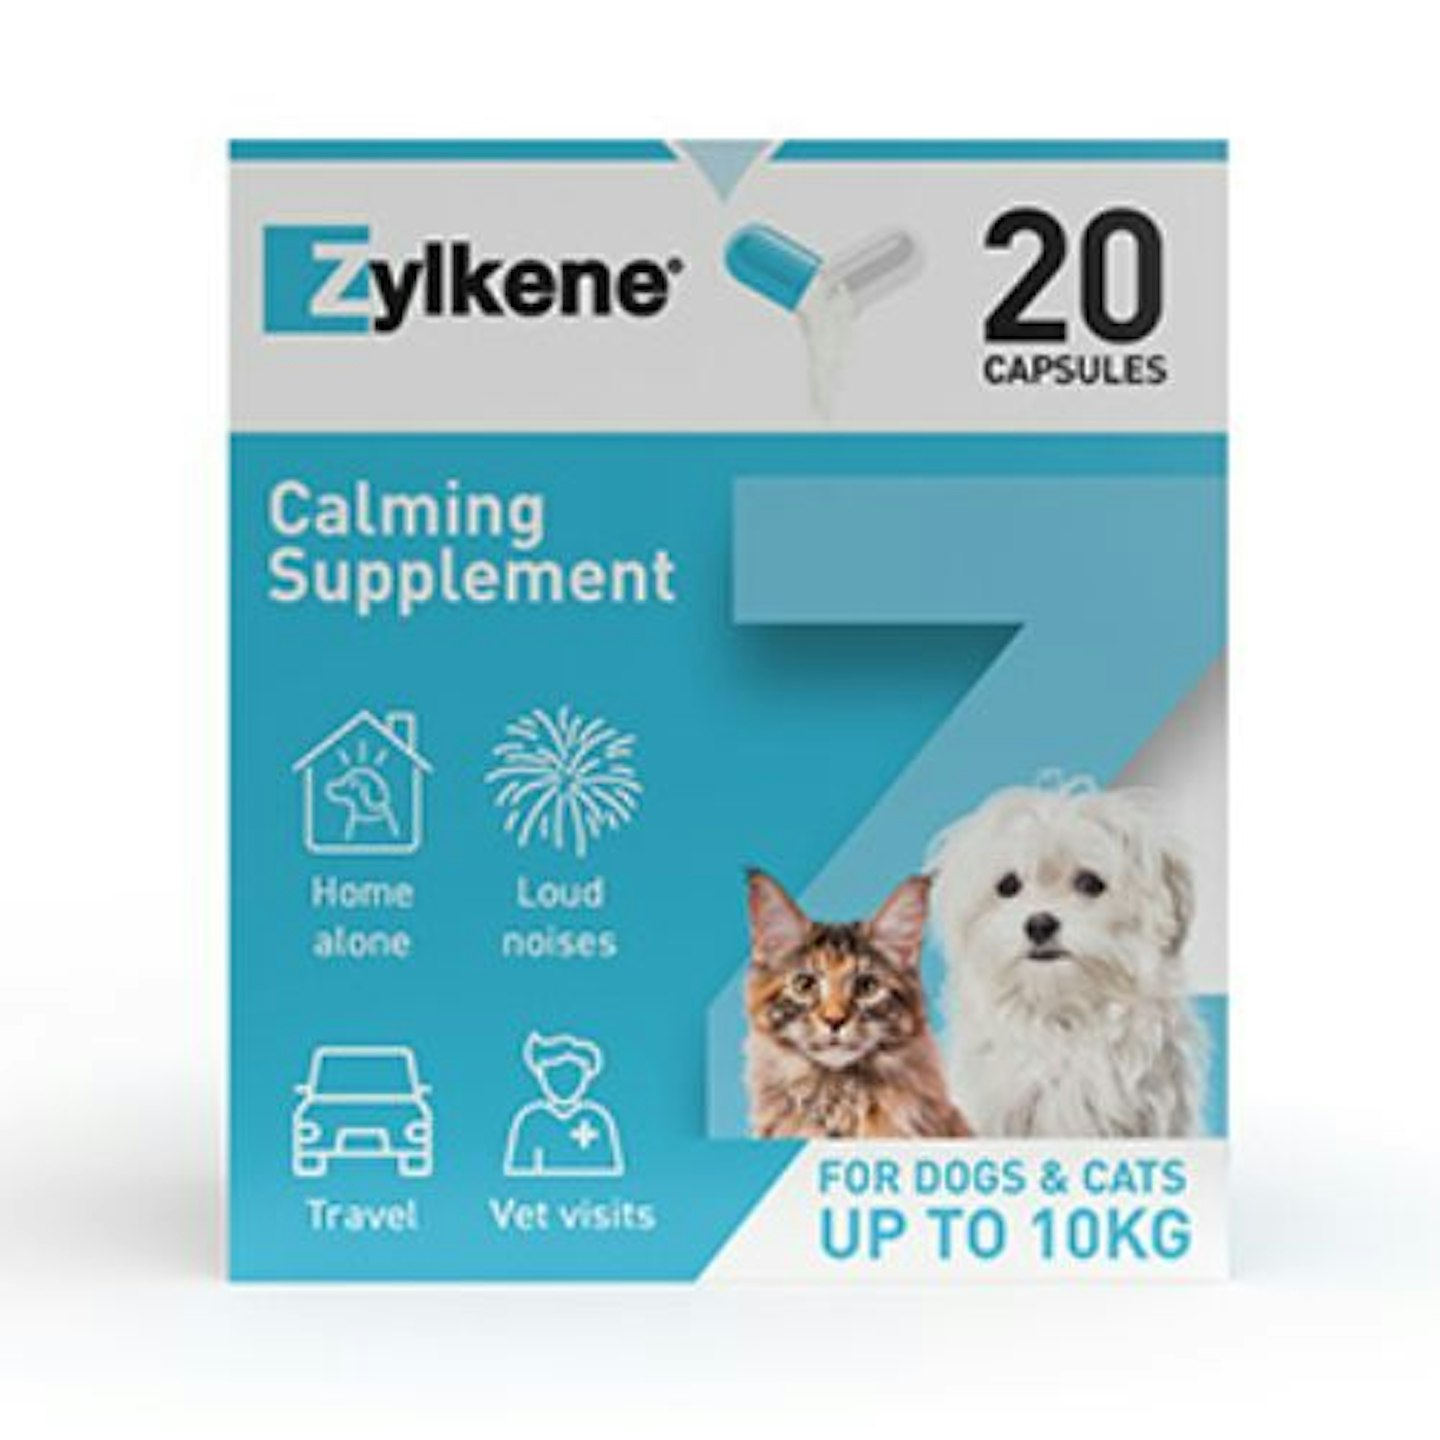 Zylkene Calming Supplement for Cats and Dogs (Up to 10kg) 20 capsules